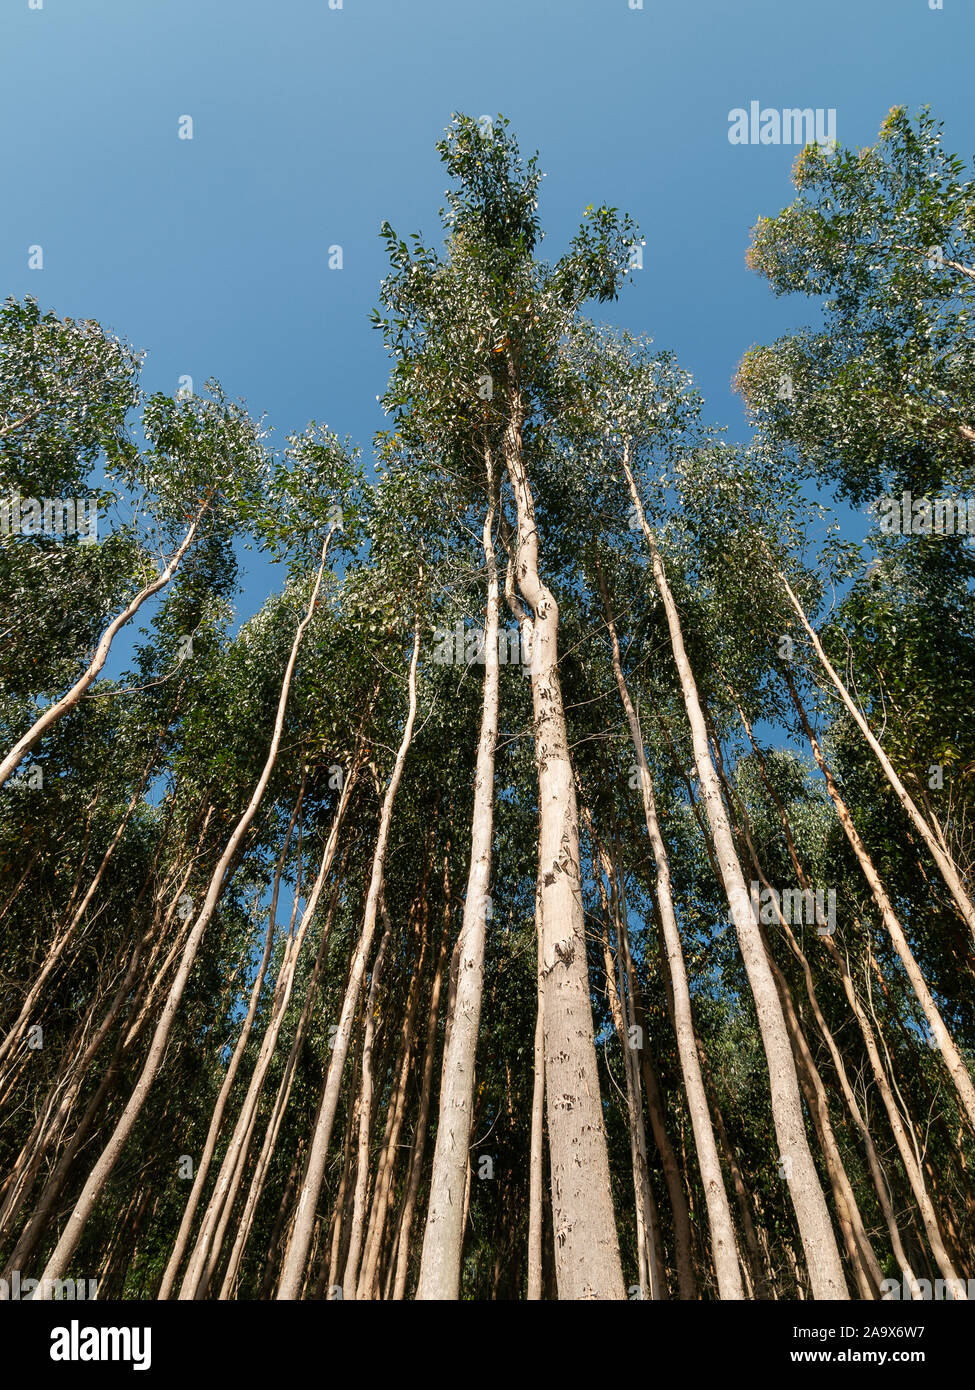 Eucalyptus plantation grown for paper or pulpwood. Low angle view. Galicia, Spain Stock Photo